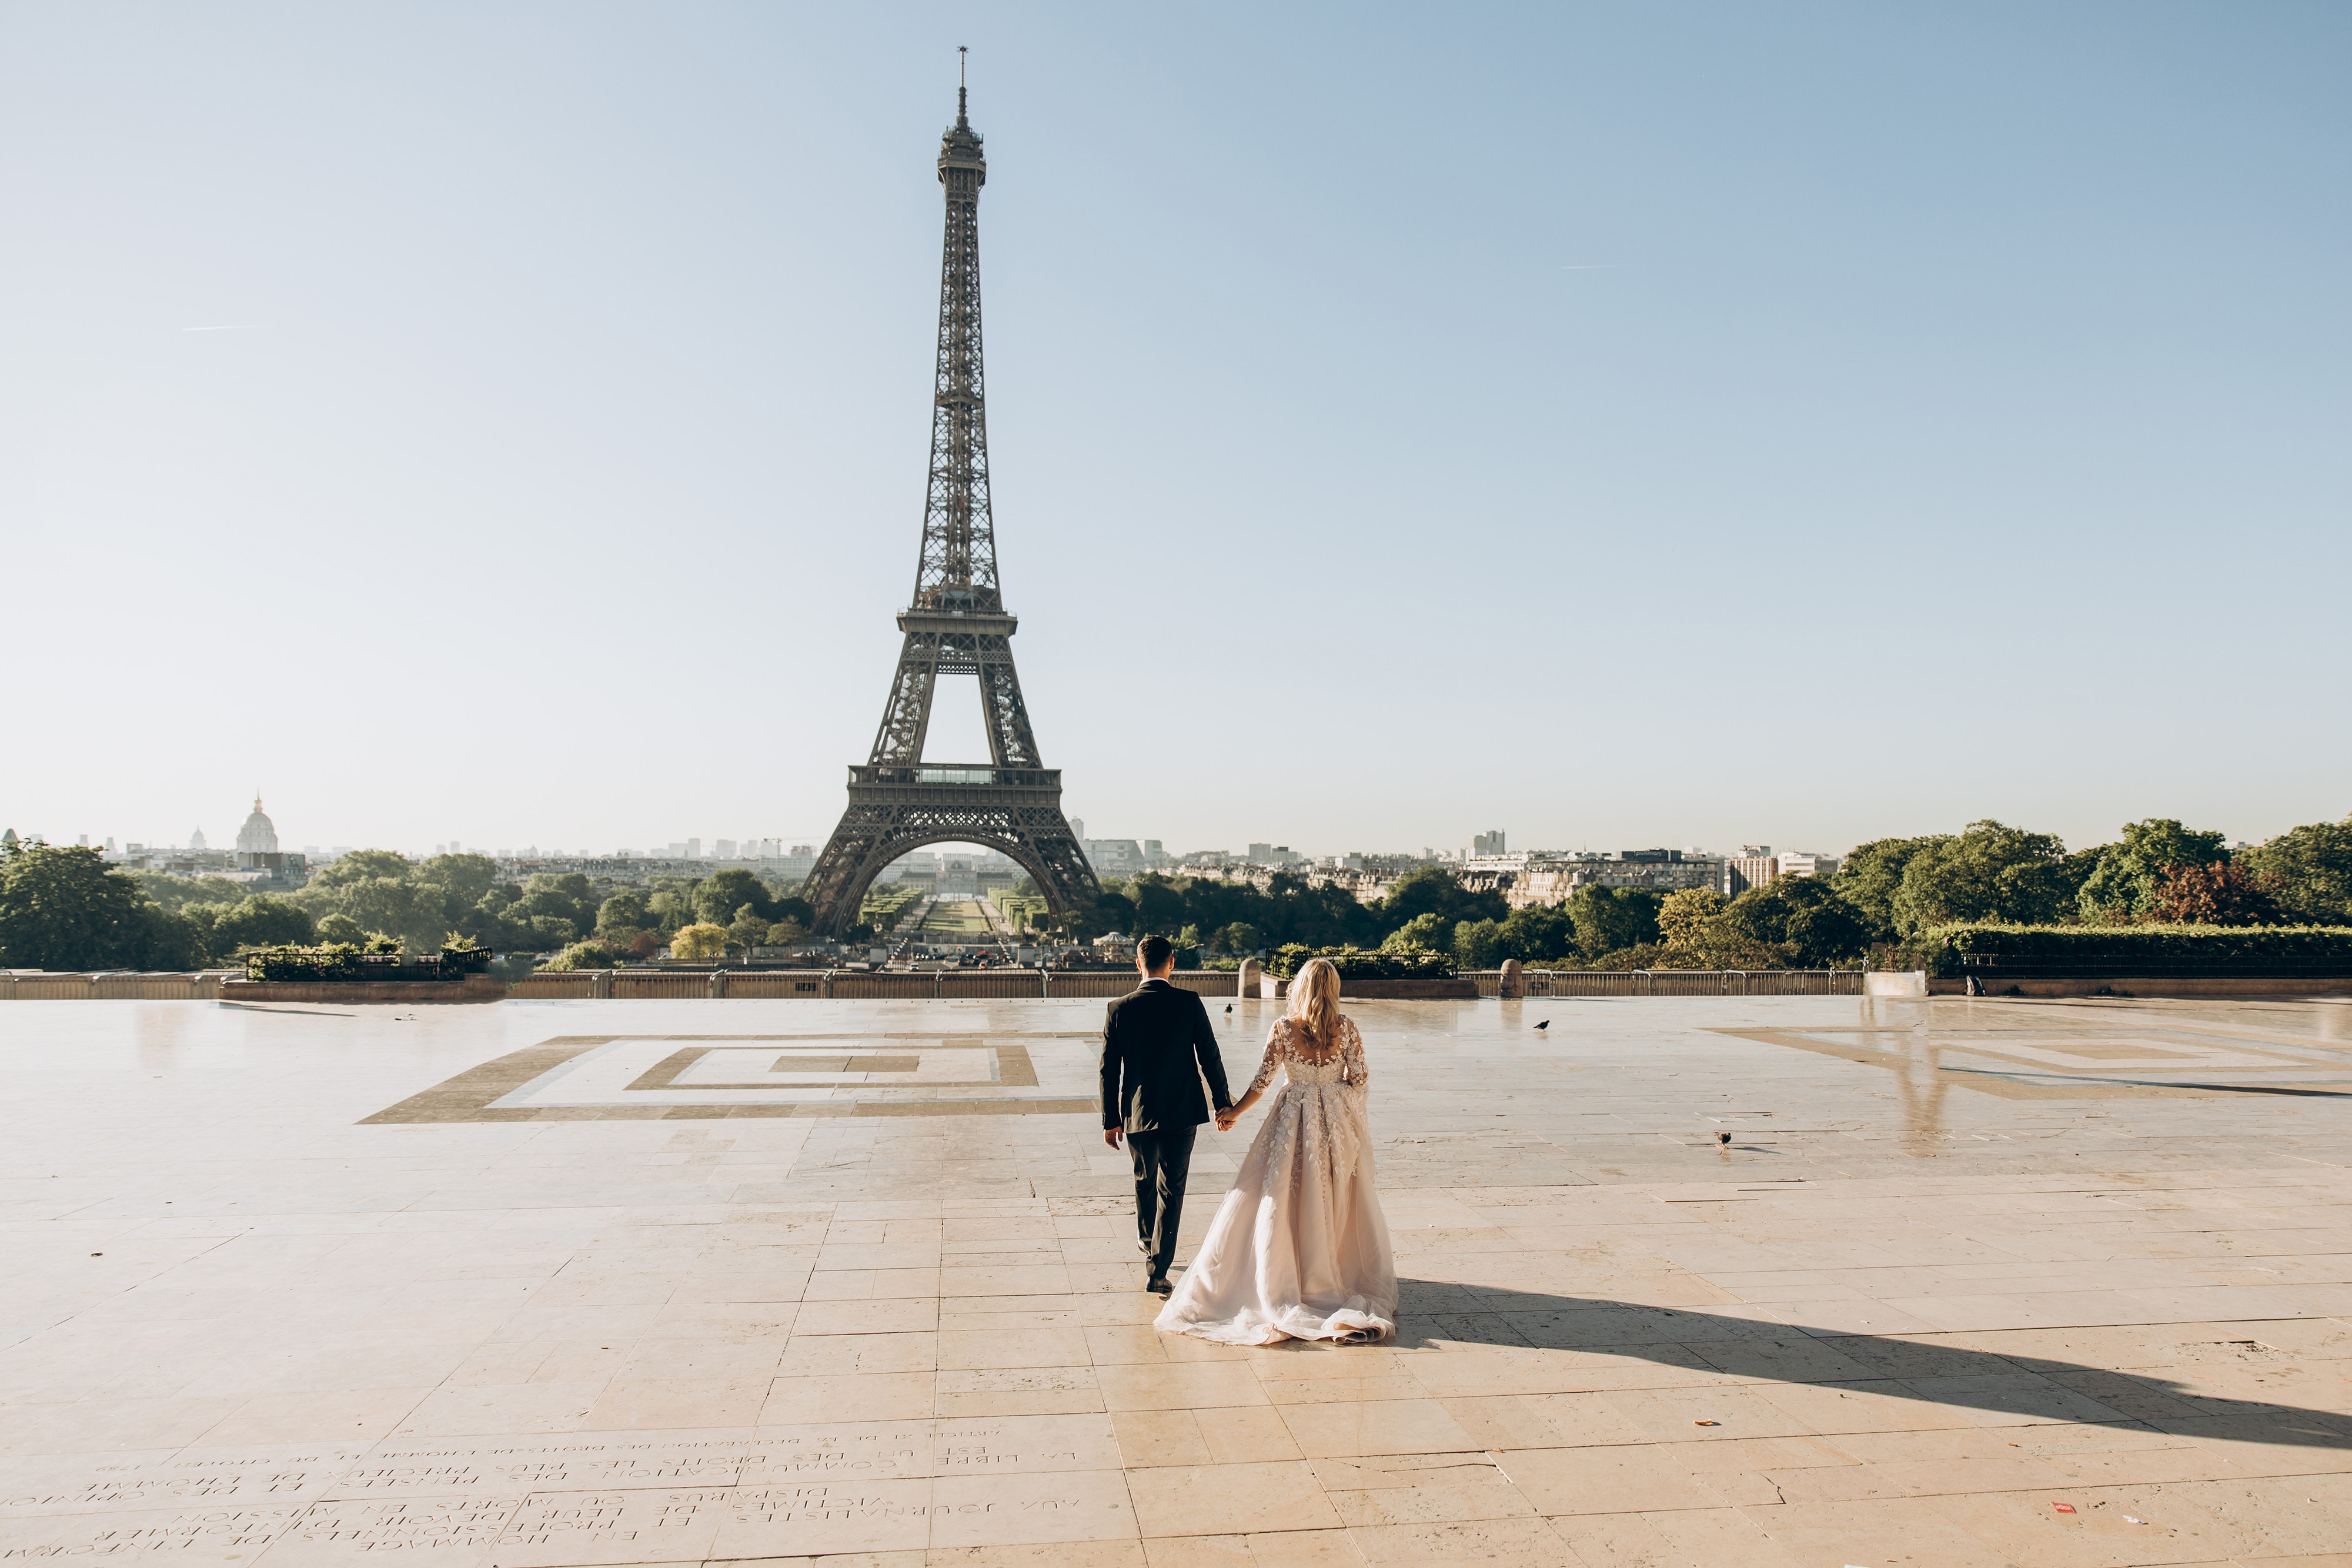 Getting married in France